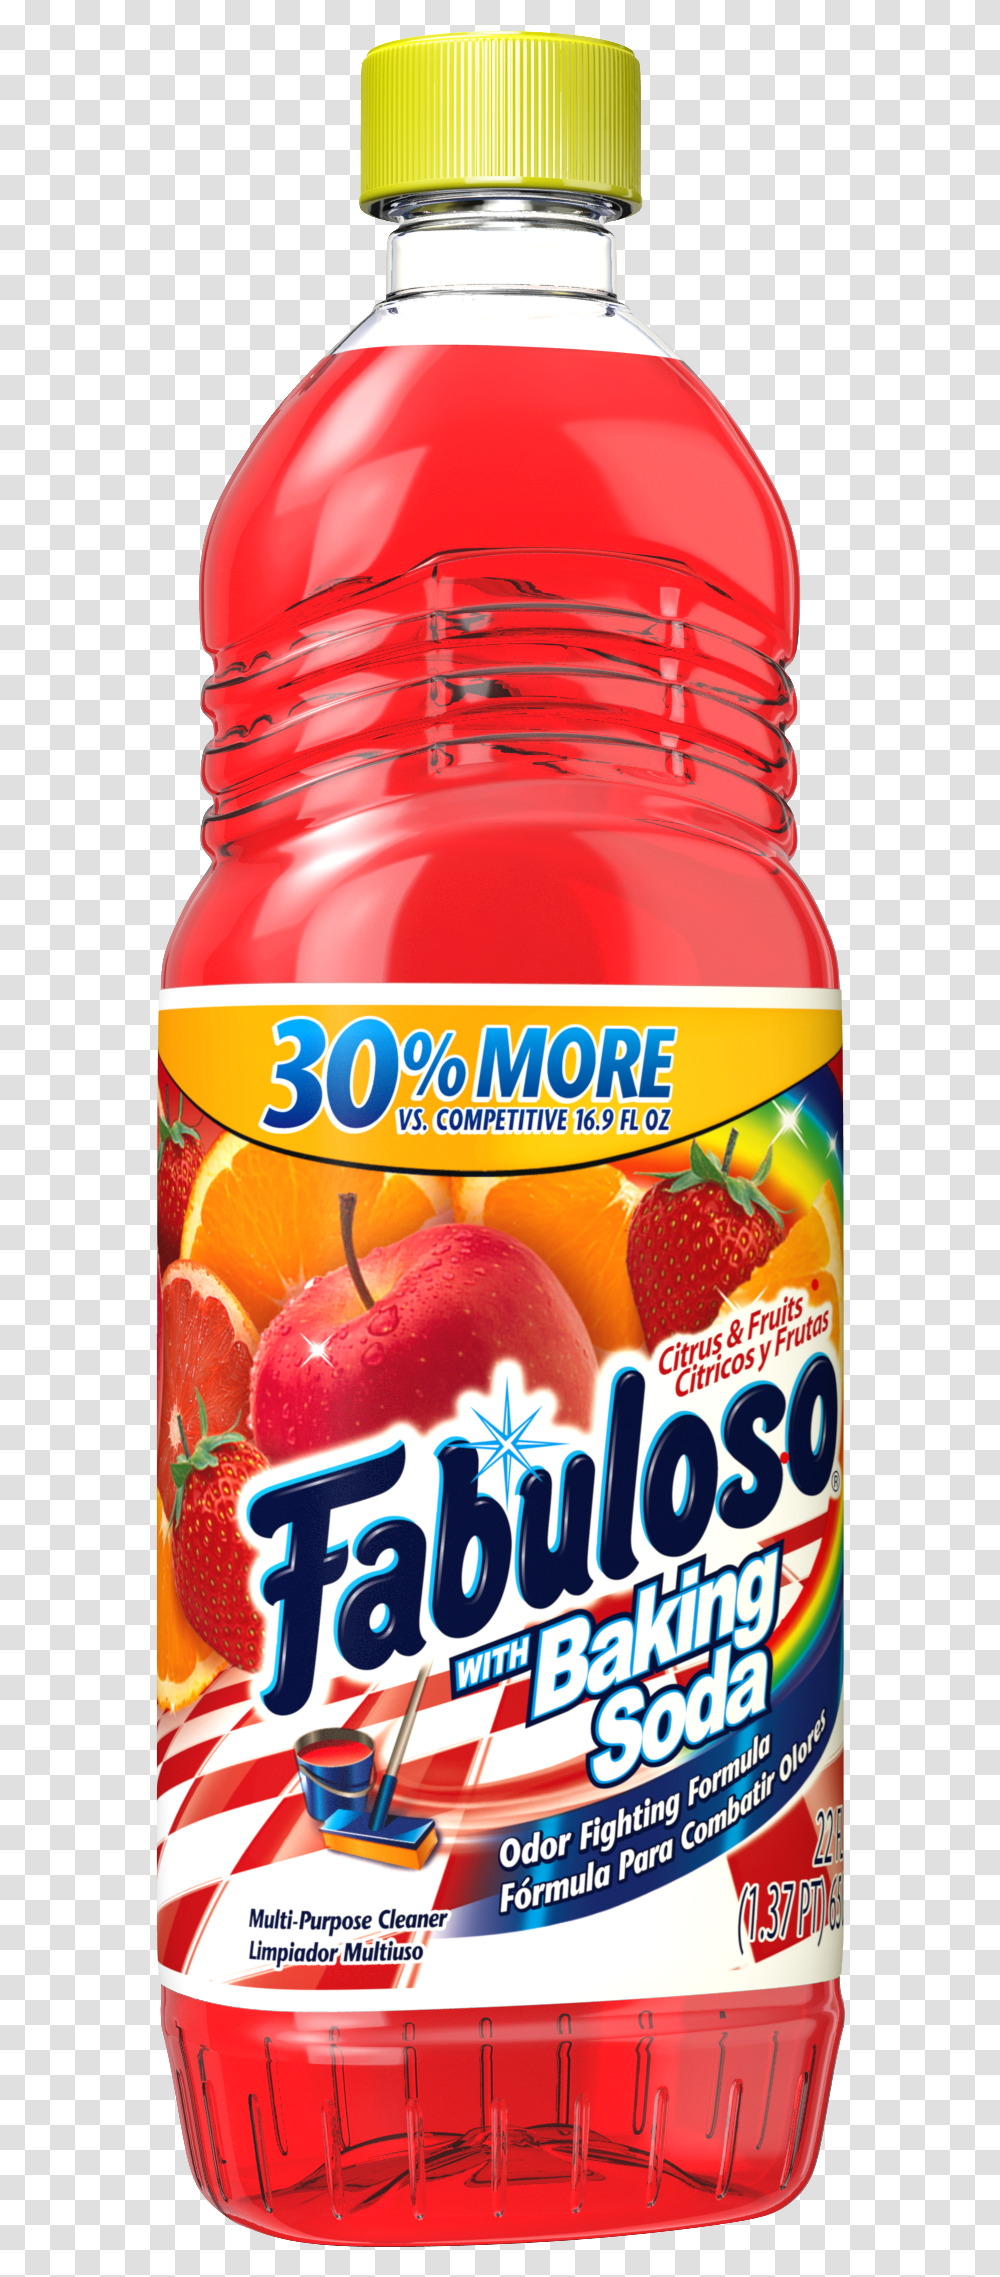 Soda Tropical Fabuloso With Baking Soda, Food, Juice, Beverage, Drink Transparent Png